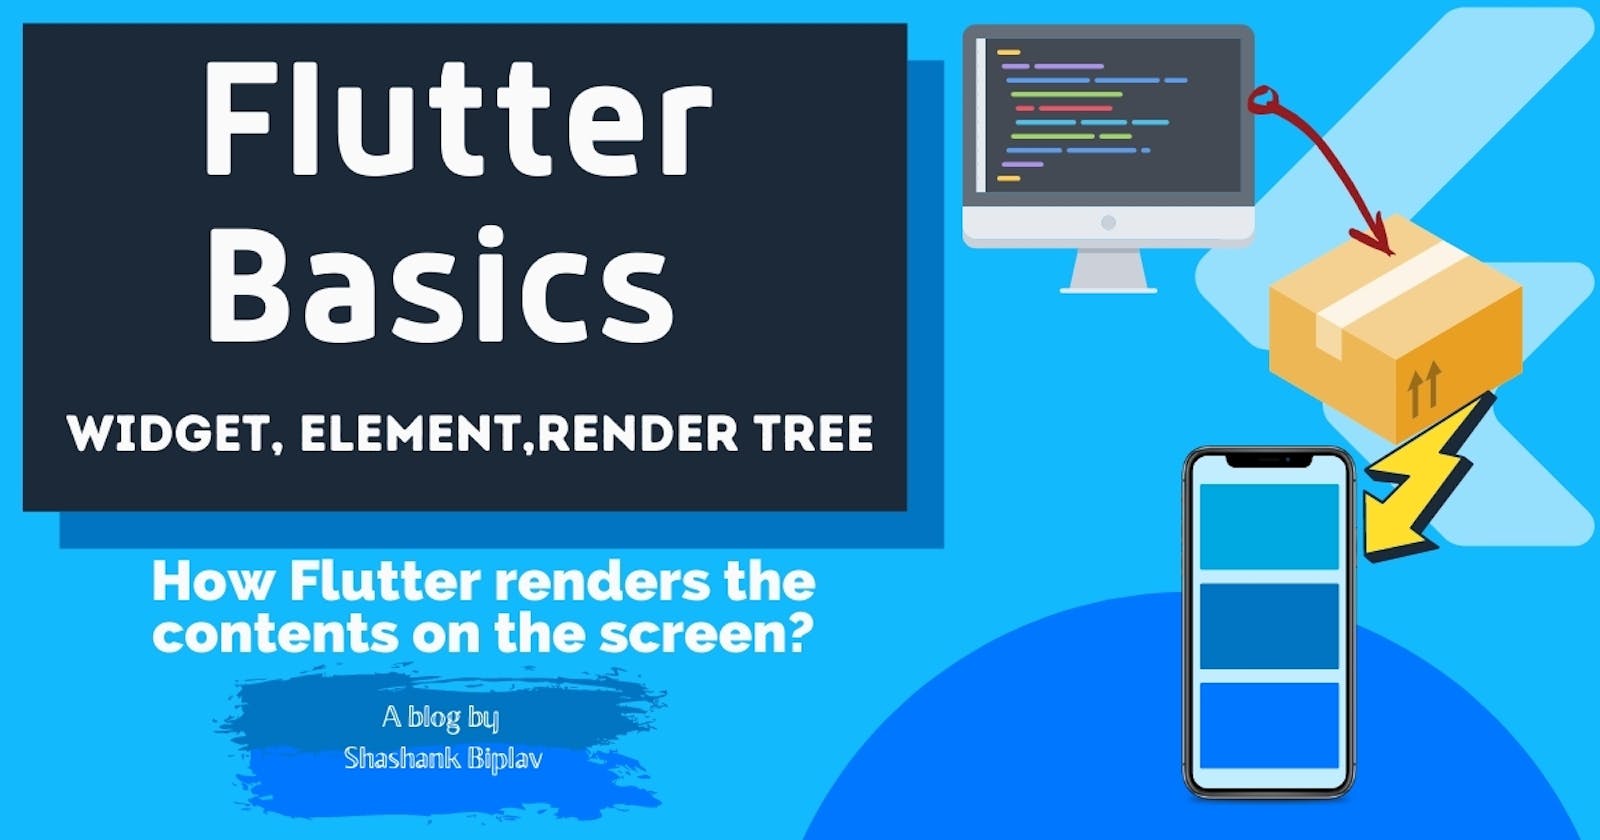 Flutter Basics - How Flutter renders the contents on the screen?